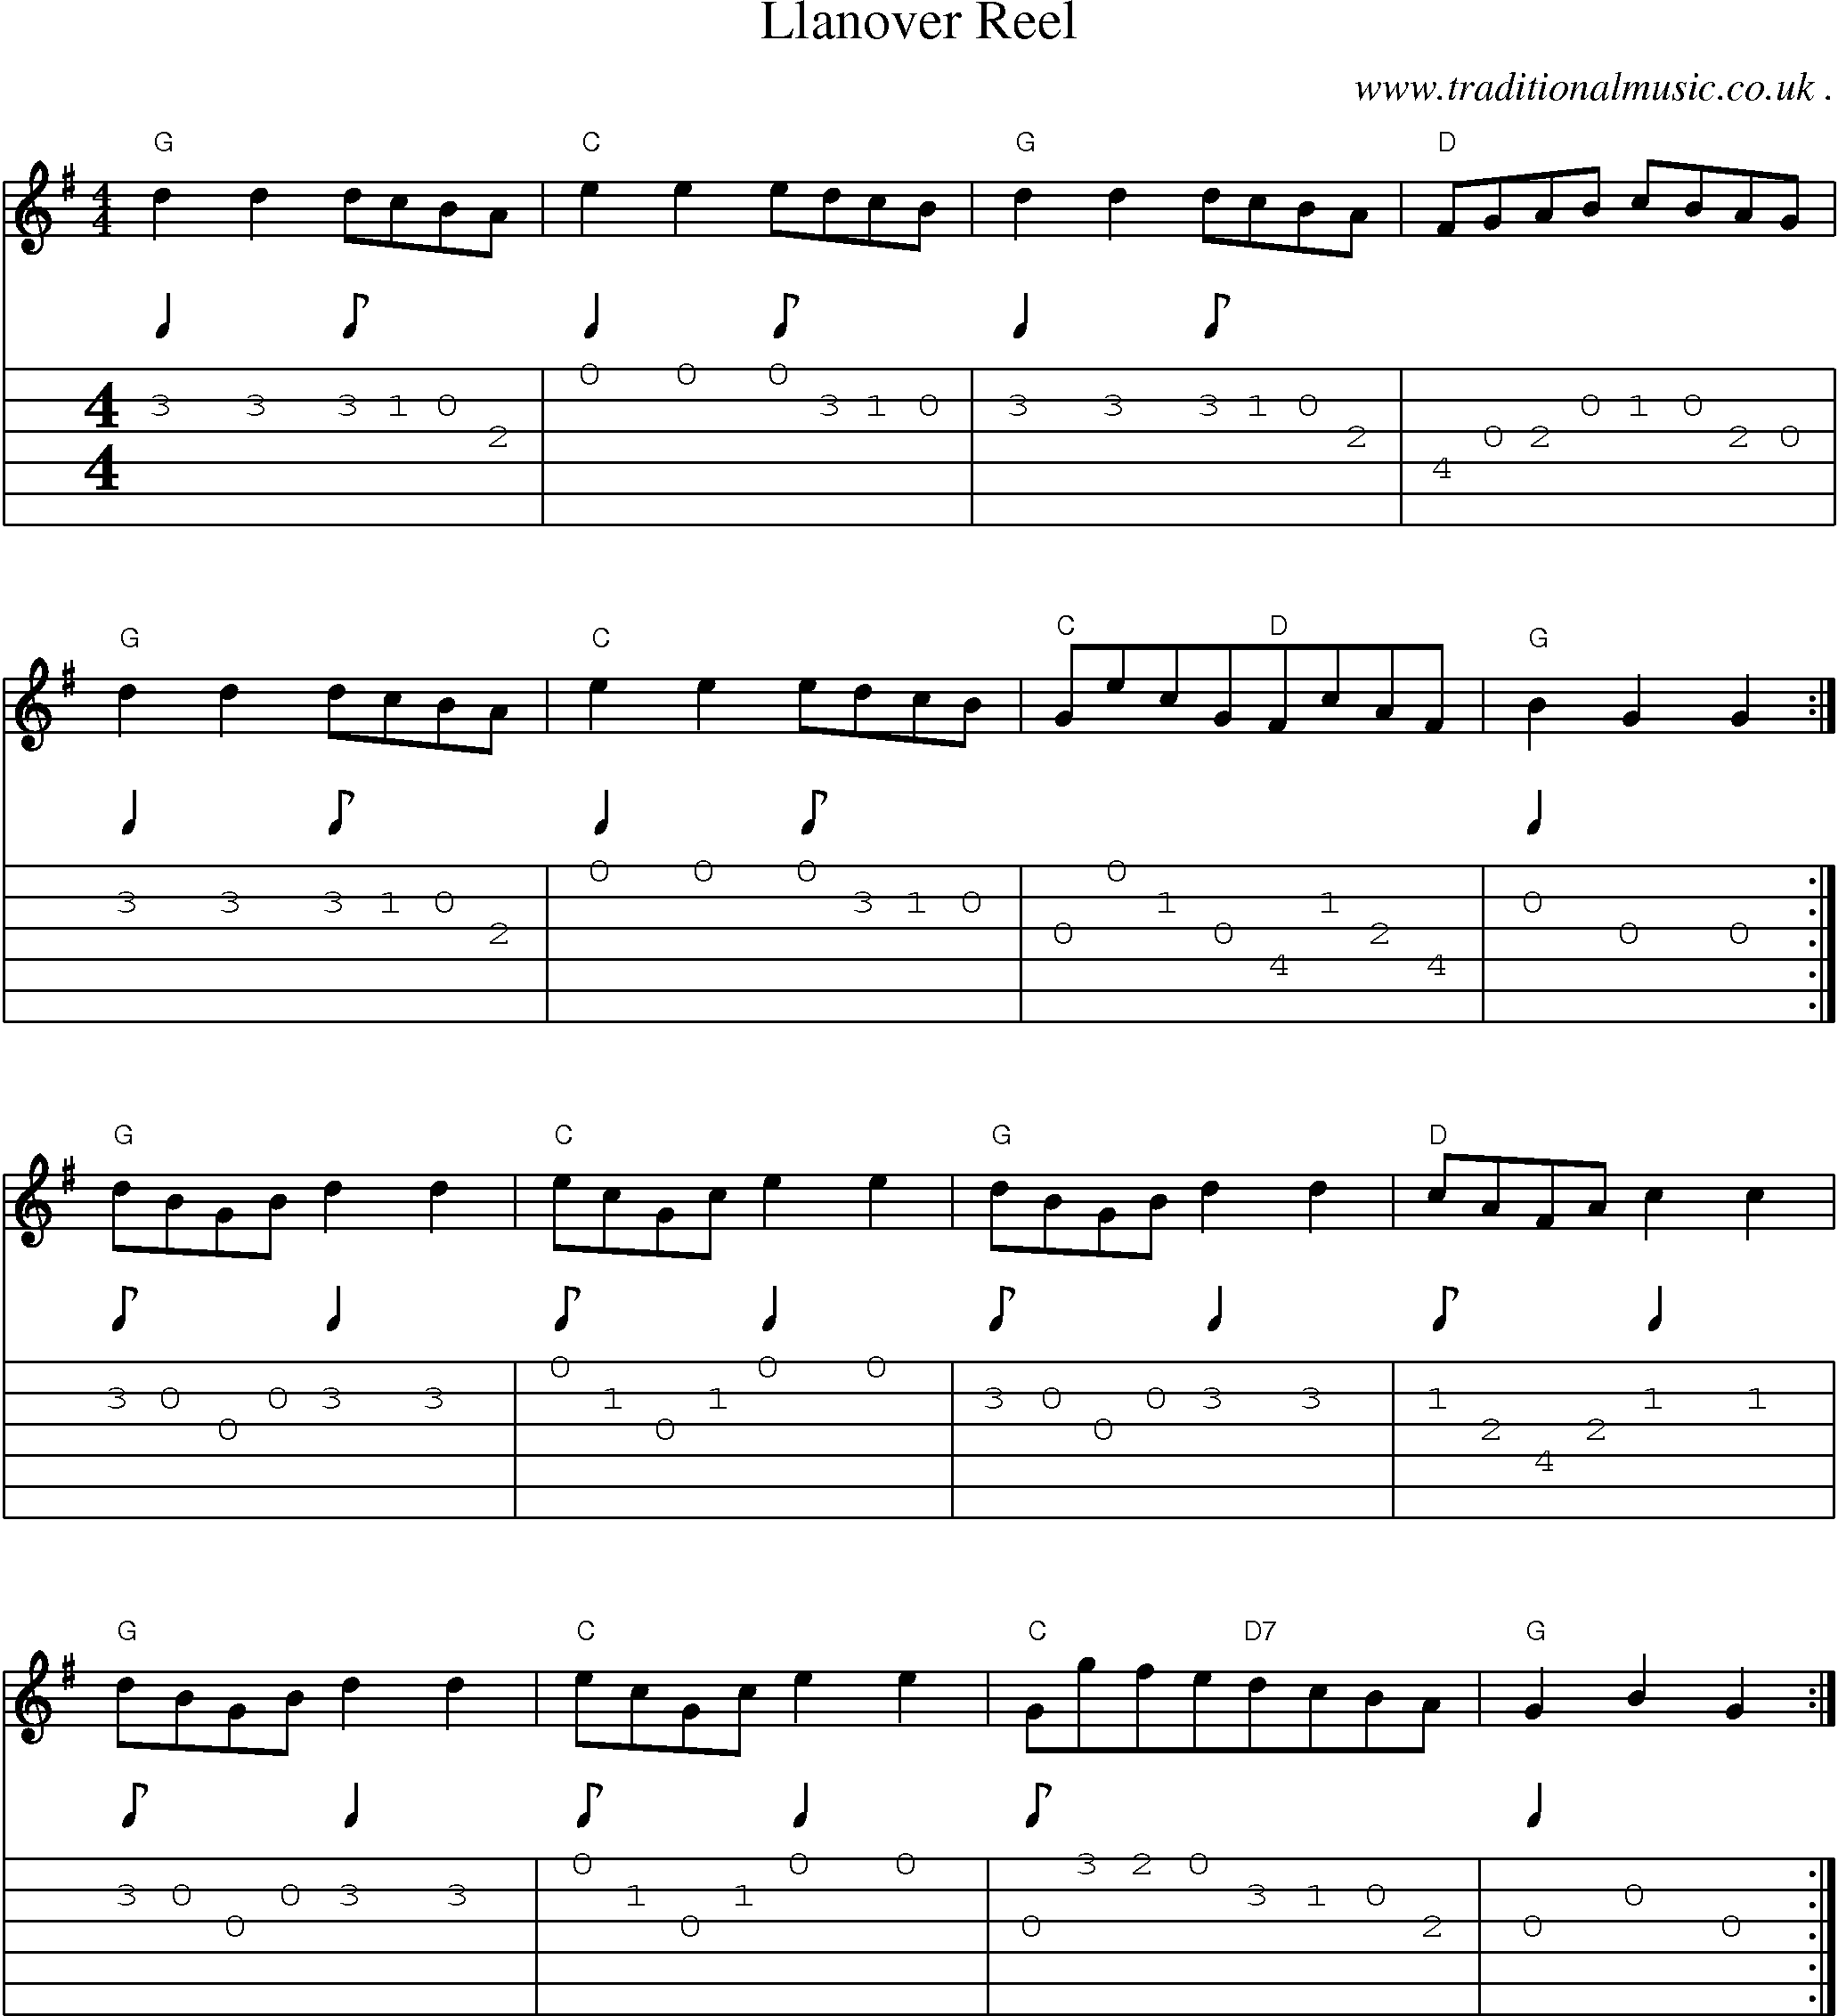 Sheet-Music and Guitar Tabs for Llanover Reel